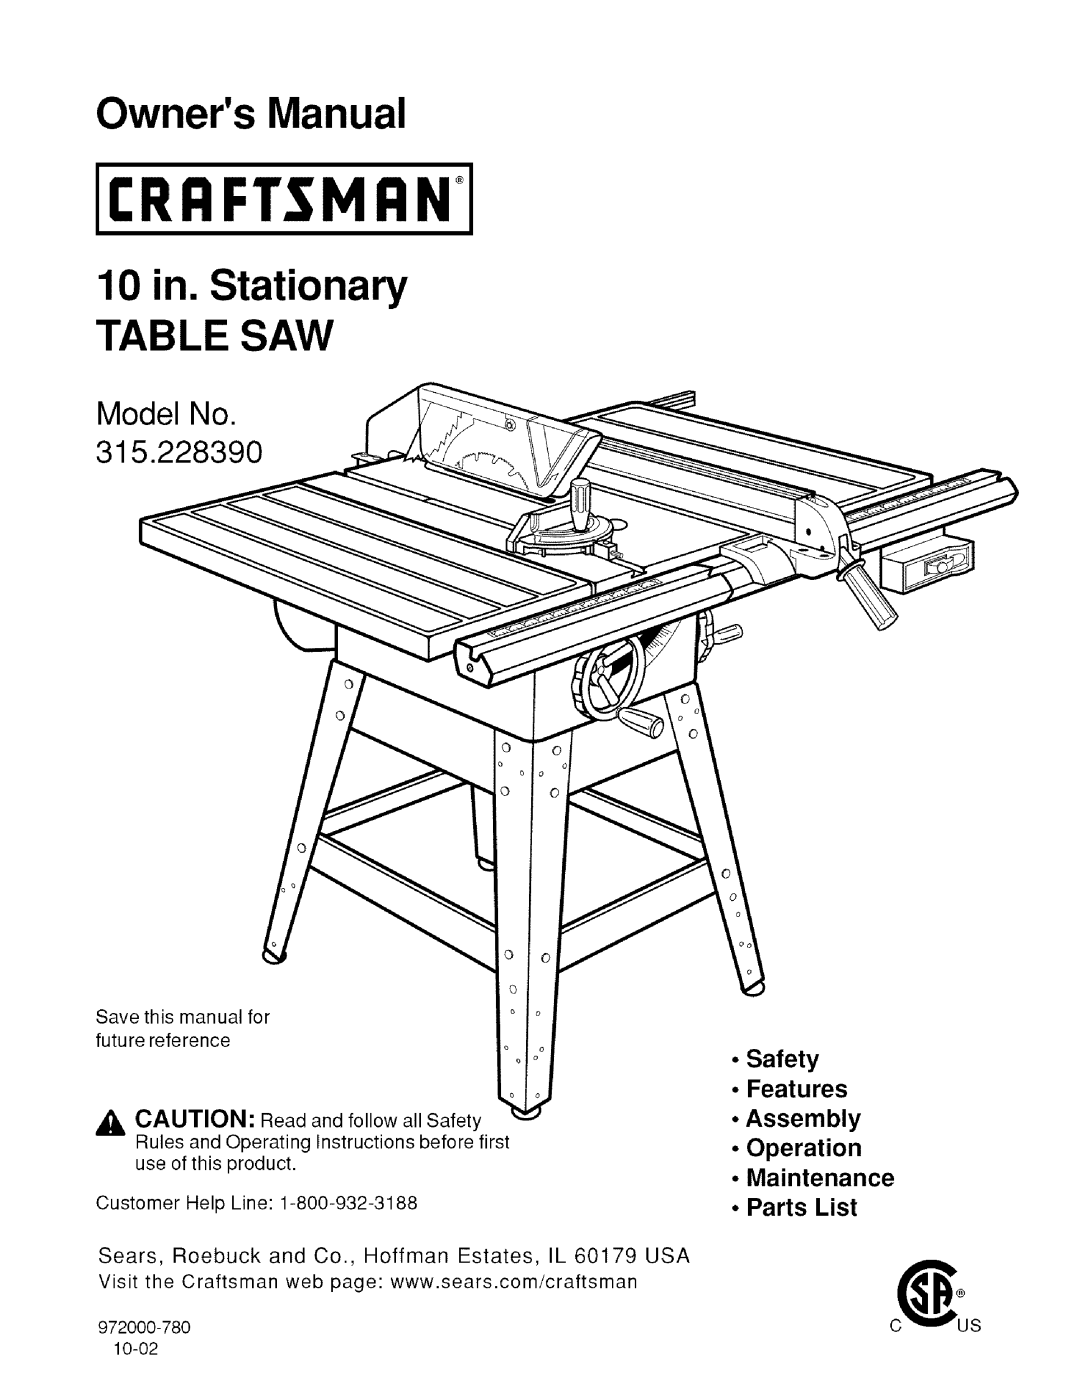 Craftsman 315.22839 owner manual Model No, Safety Features Assembly Operation Maintenance Parts List, IIRRFrSMRN 